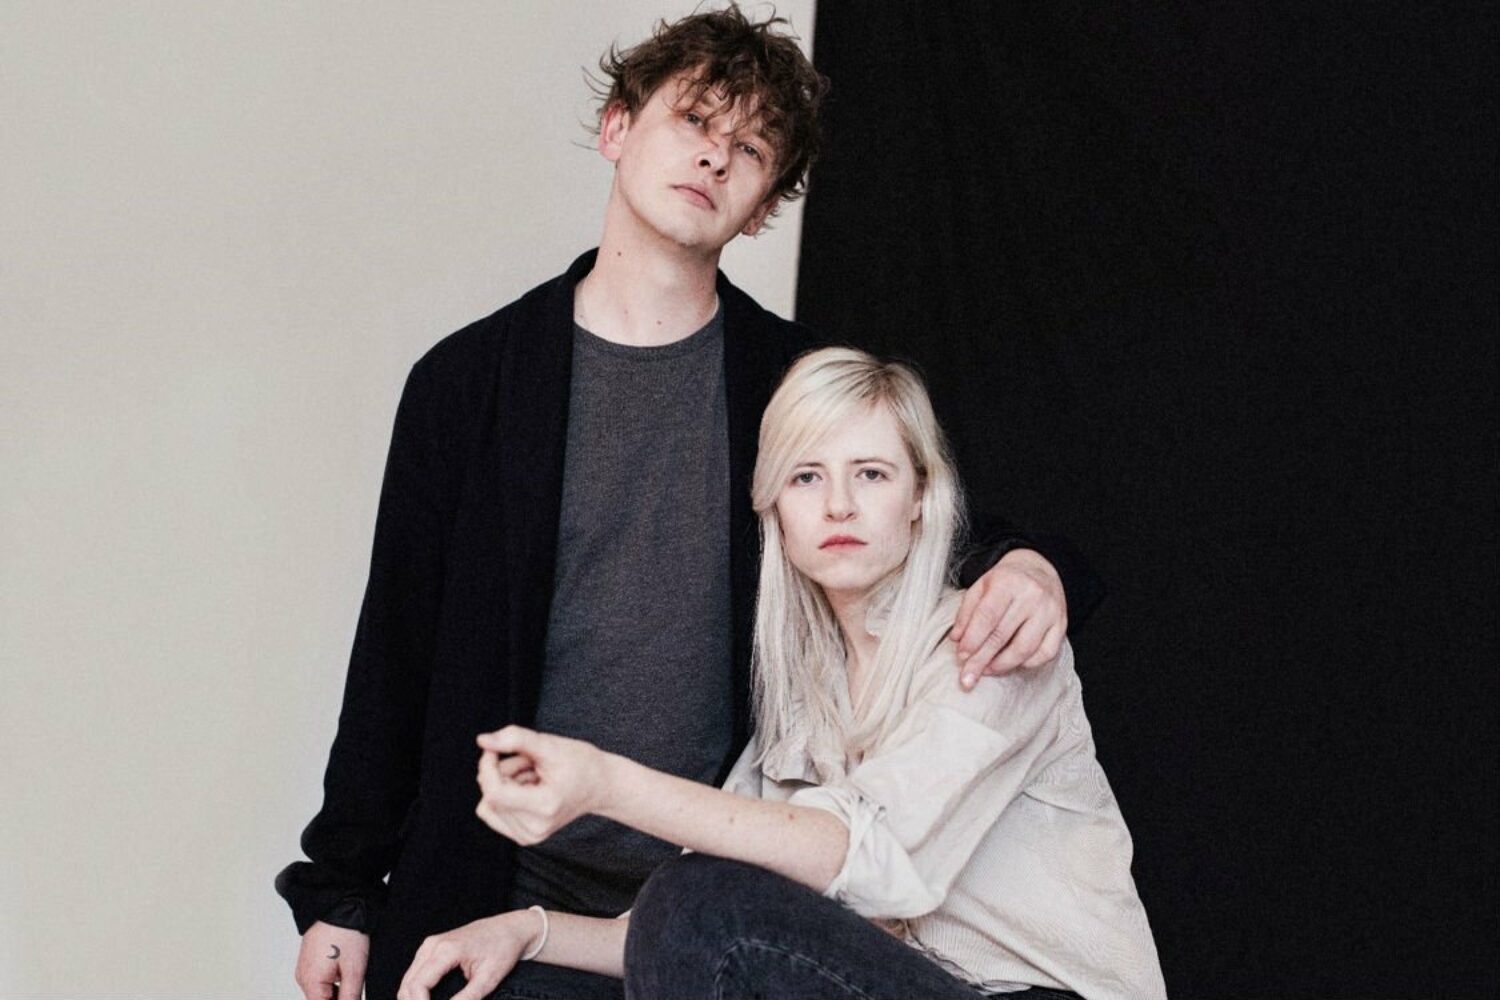 Amber Arcades and Bill Ryder-Jones team up on ‘Wouldn’t Even Know’